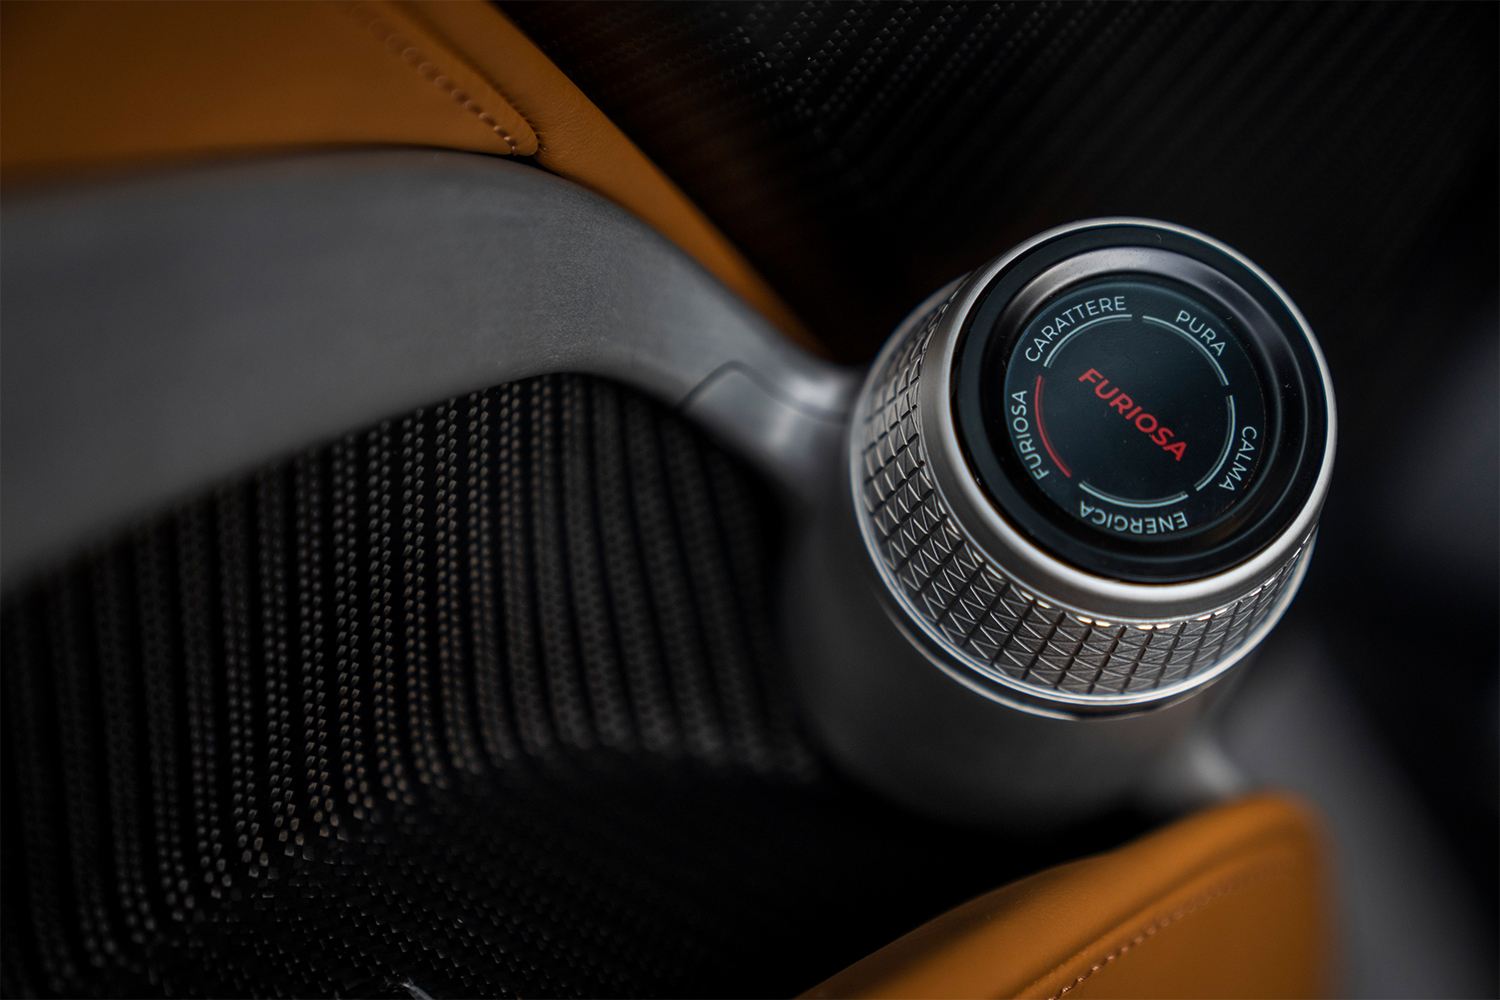 The driving mode selector in the new Automobili Pininfarina Battista hypercar, which includes modes like Calma and Furiosa